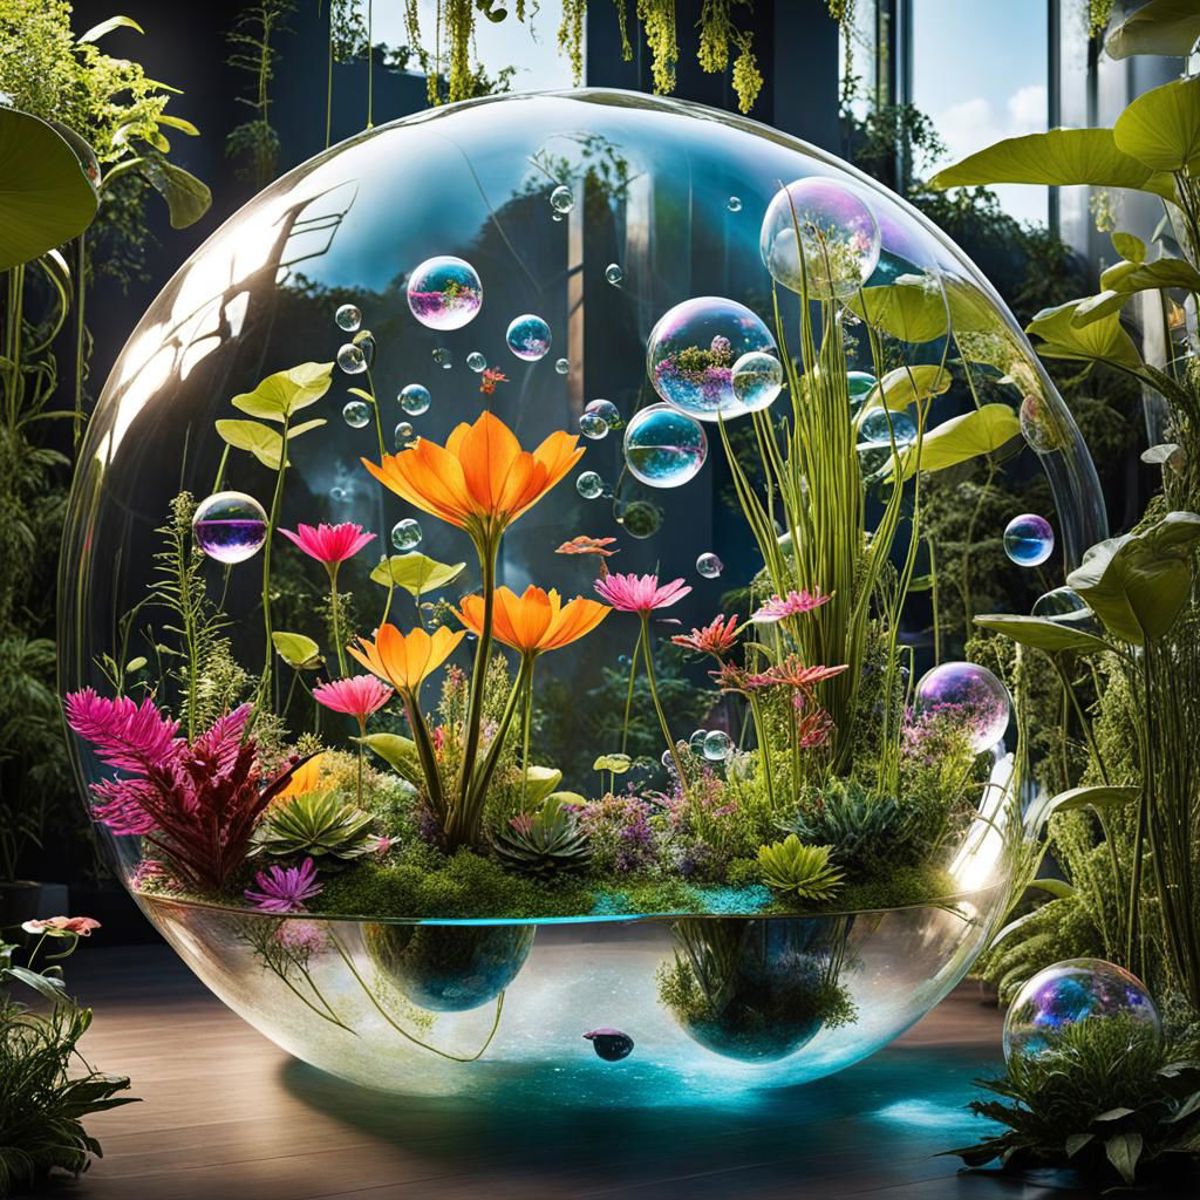 A 3D model of a glass sphere with a flower garden inside of it.